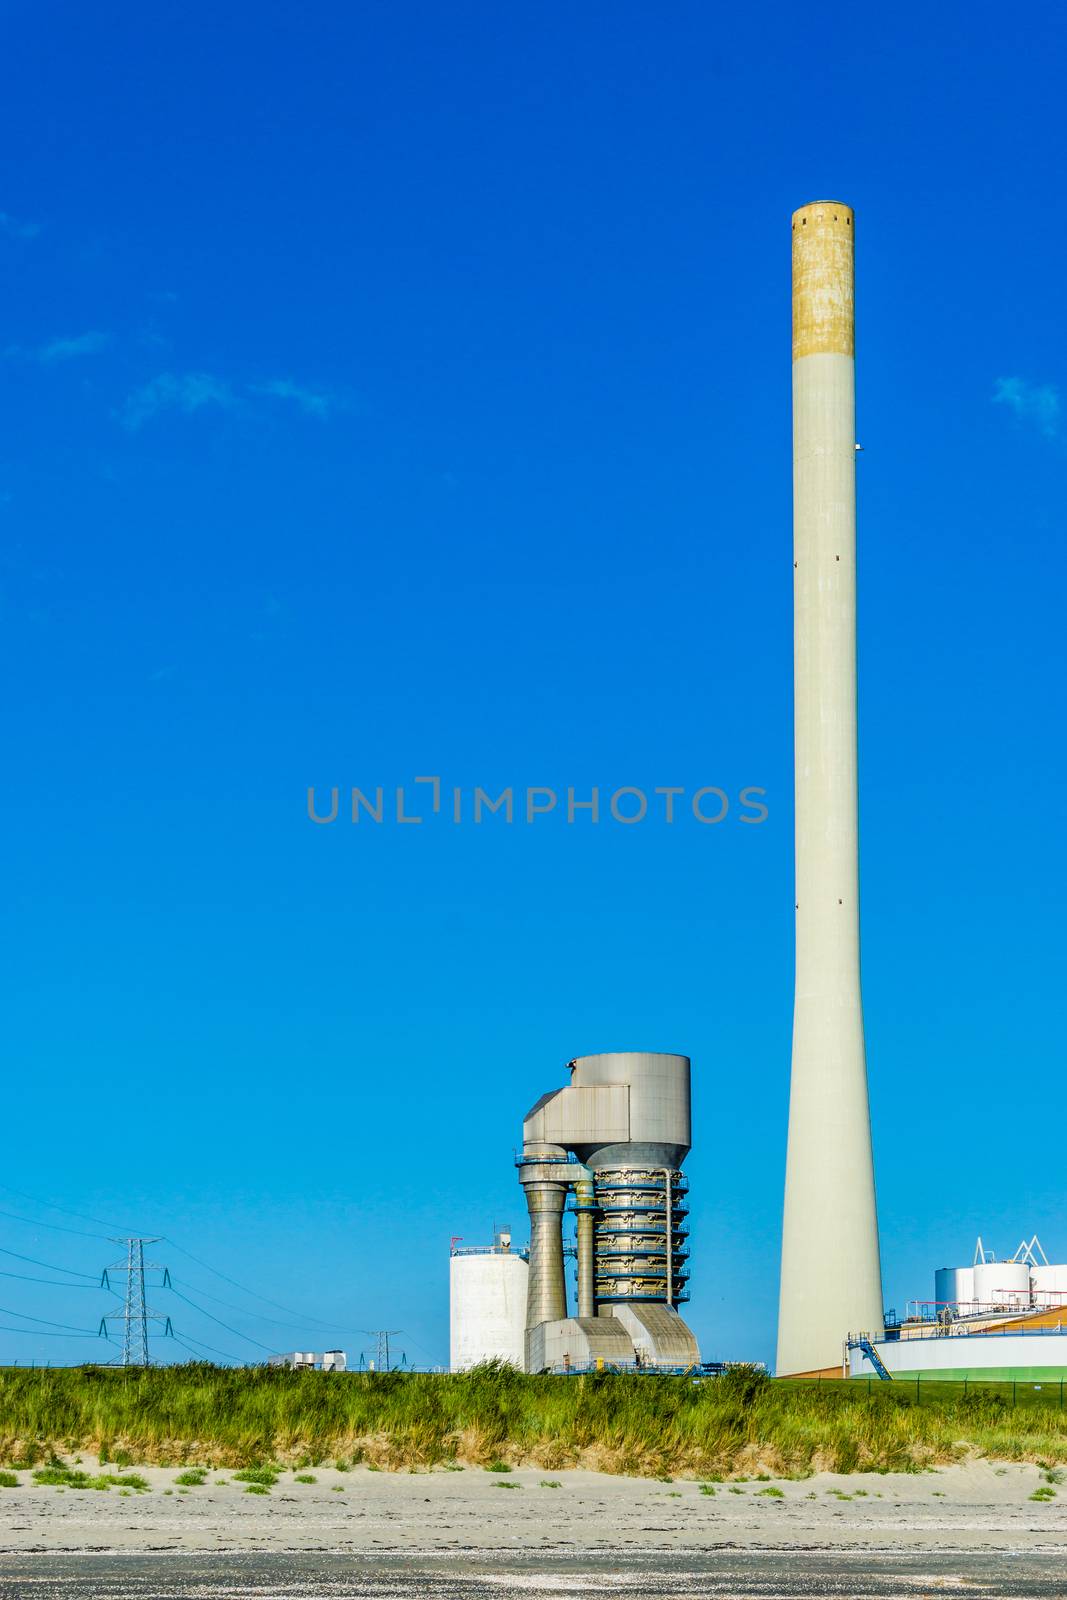 industry factory at the beach landscape by charlottebleijenberg